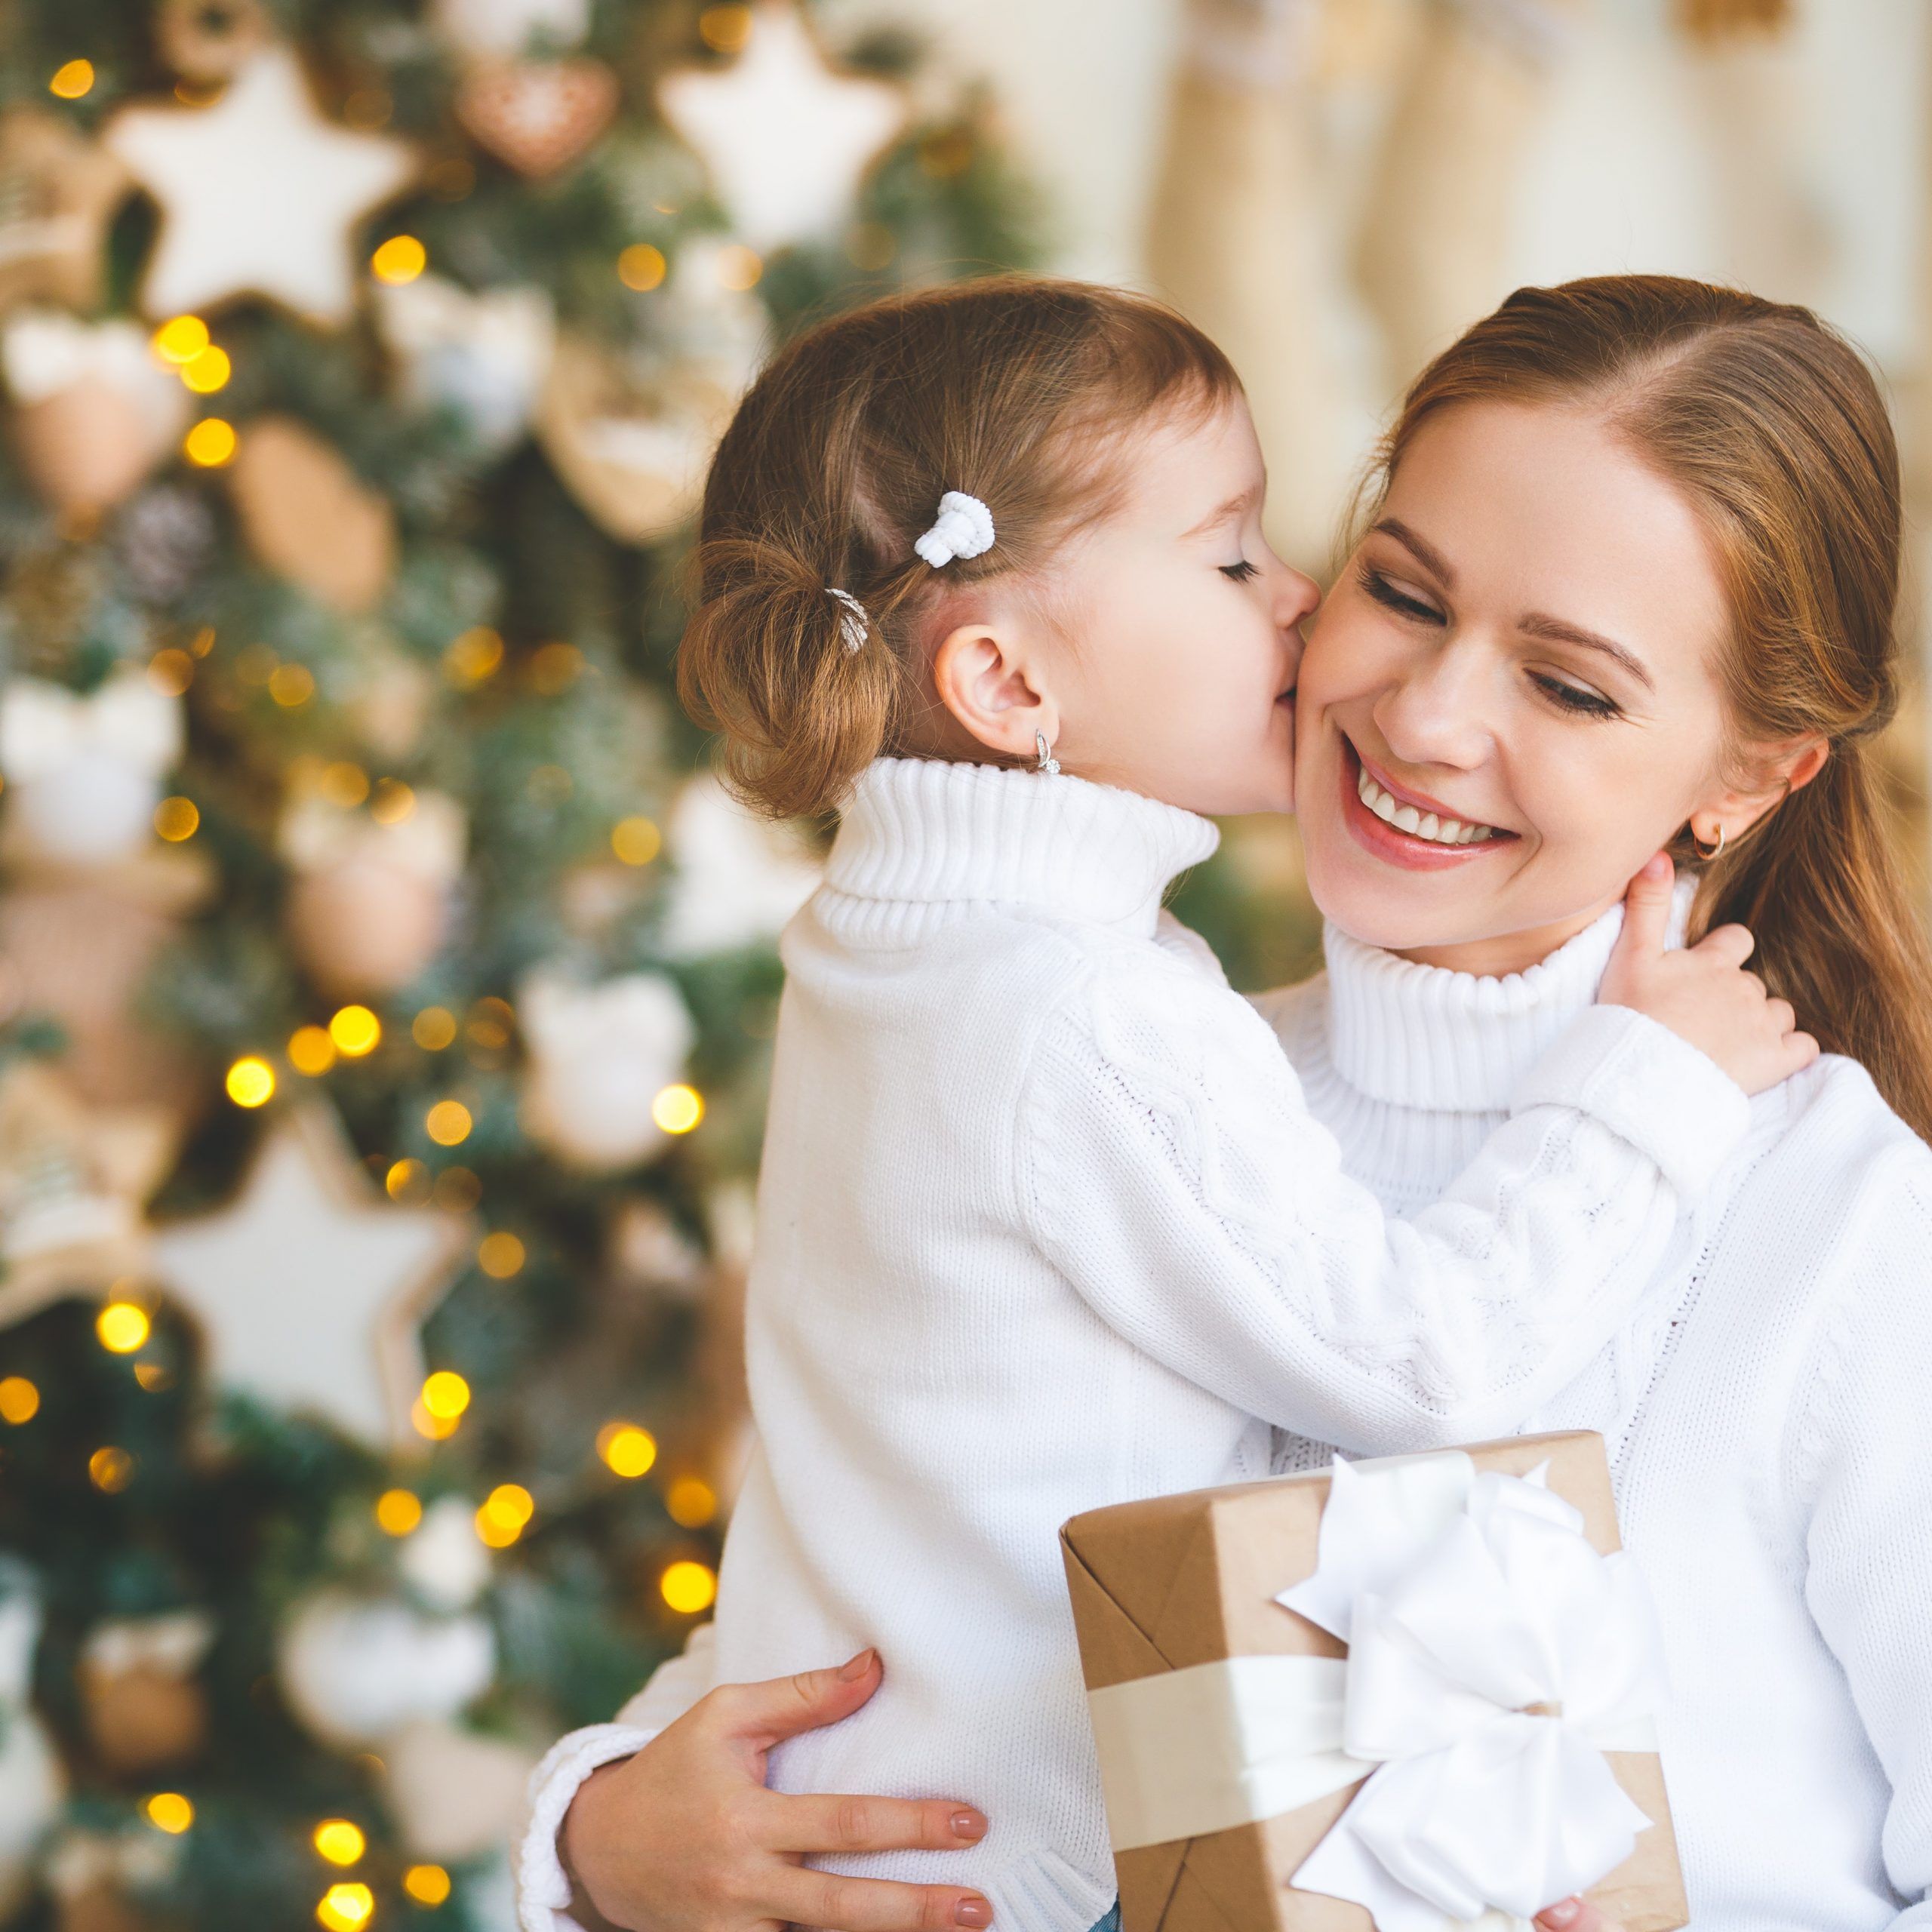 Don’t let indoor allergens take the fun out of your Christmas